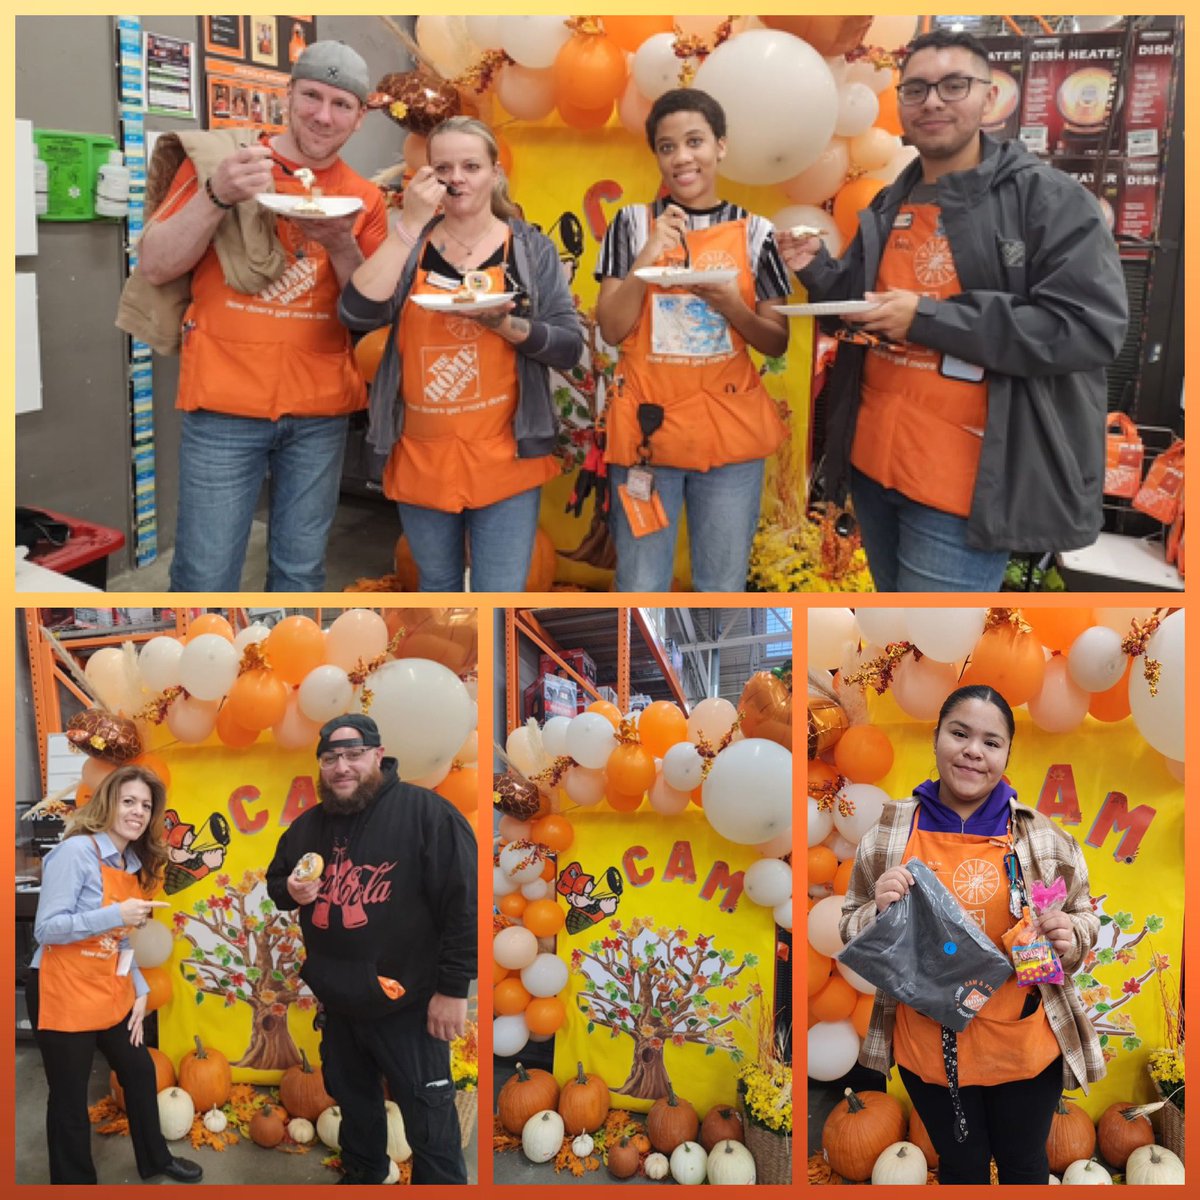 The first 3 days of our CAM brought the fun with our fantastic 908 Photo Booth..@Tino_Longobardi @fearon_frank @LourdesPerry15 @XoXoNicole420